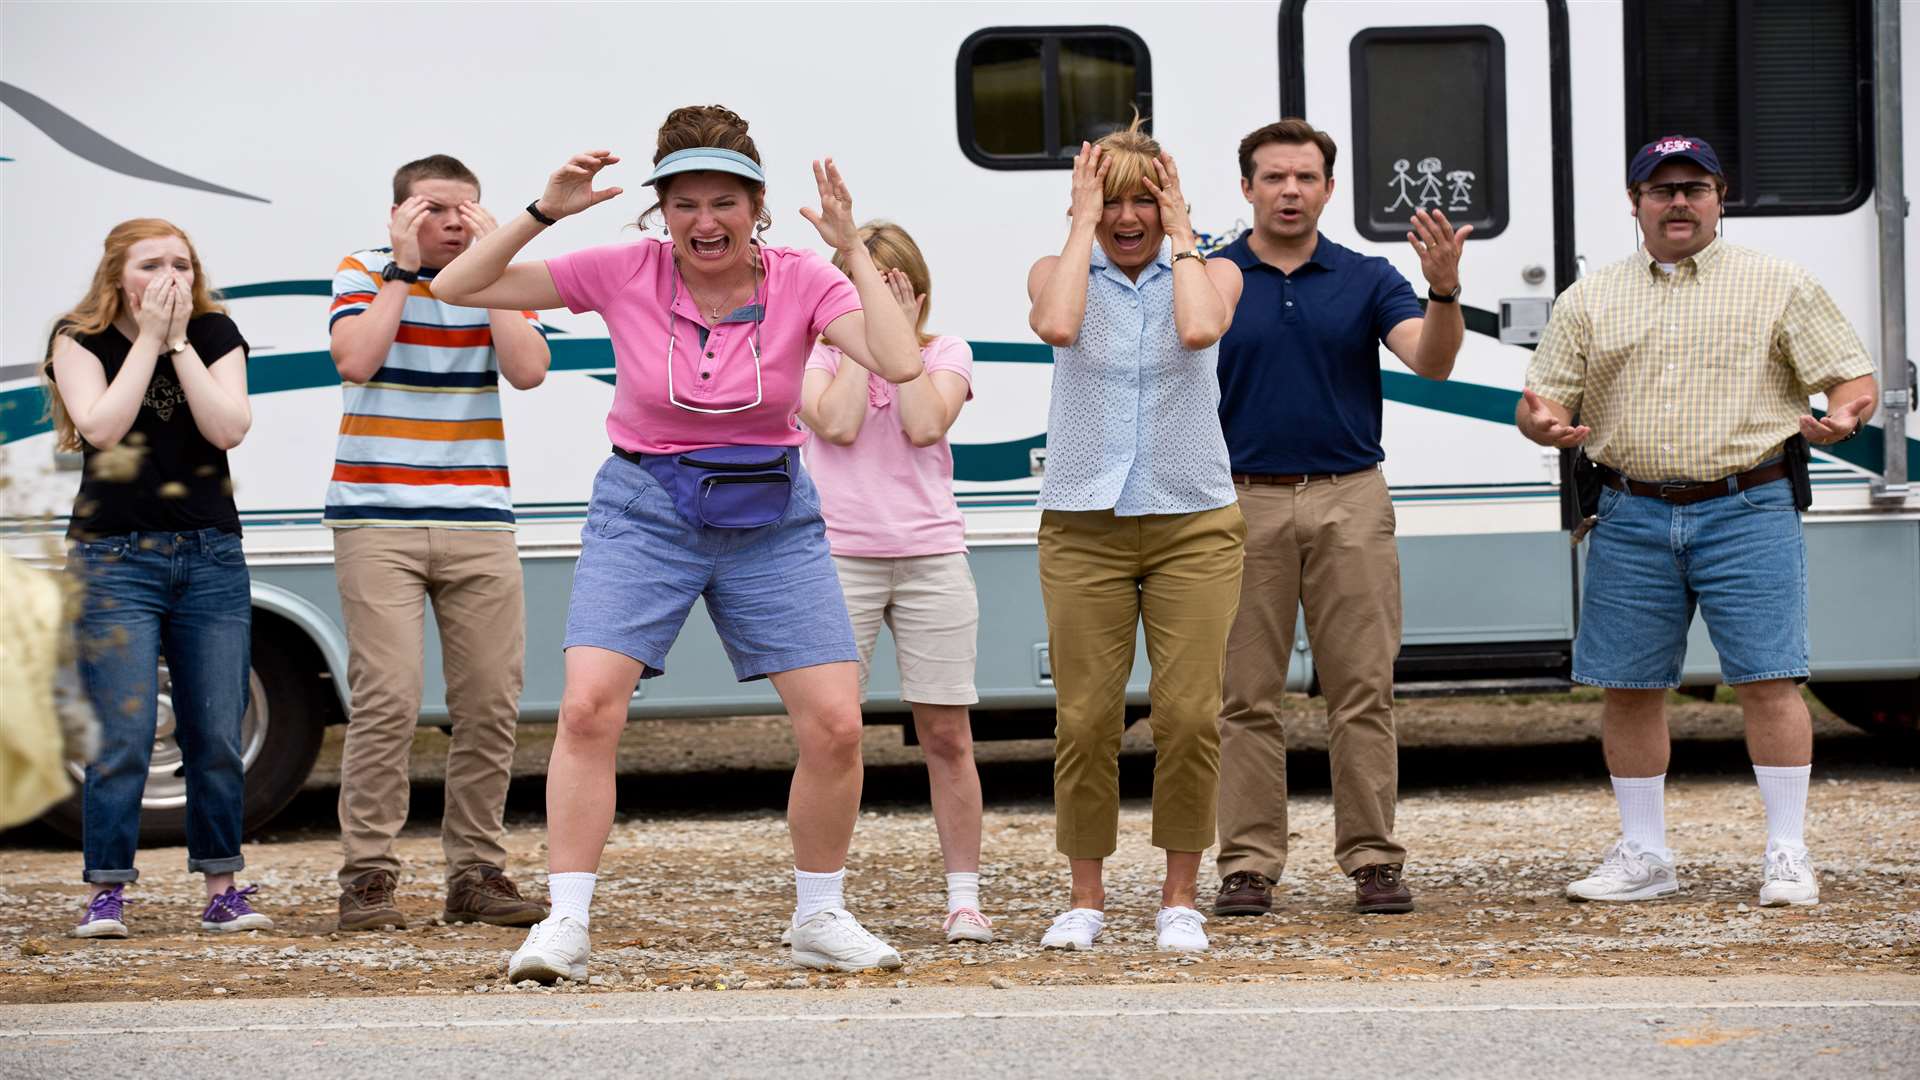 We're The Millers with Will Poulter as Kenny, Emma Roberts as Casey, Jason Sudeikis as David, Nick Offerman as Don, Kathryn Hahn as Edie and Jennifer Aniston as Rose. Picture: PA Photo/Warner Brothers.